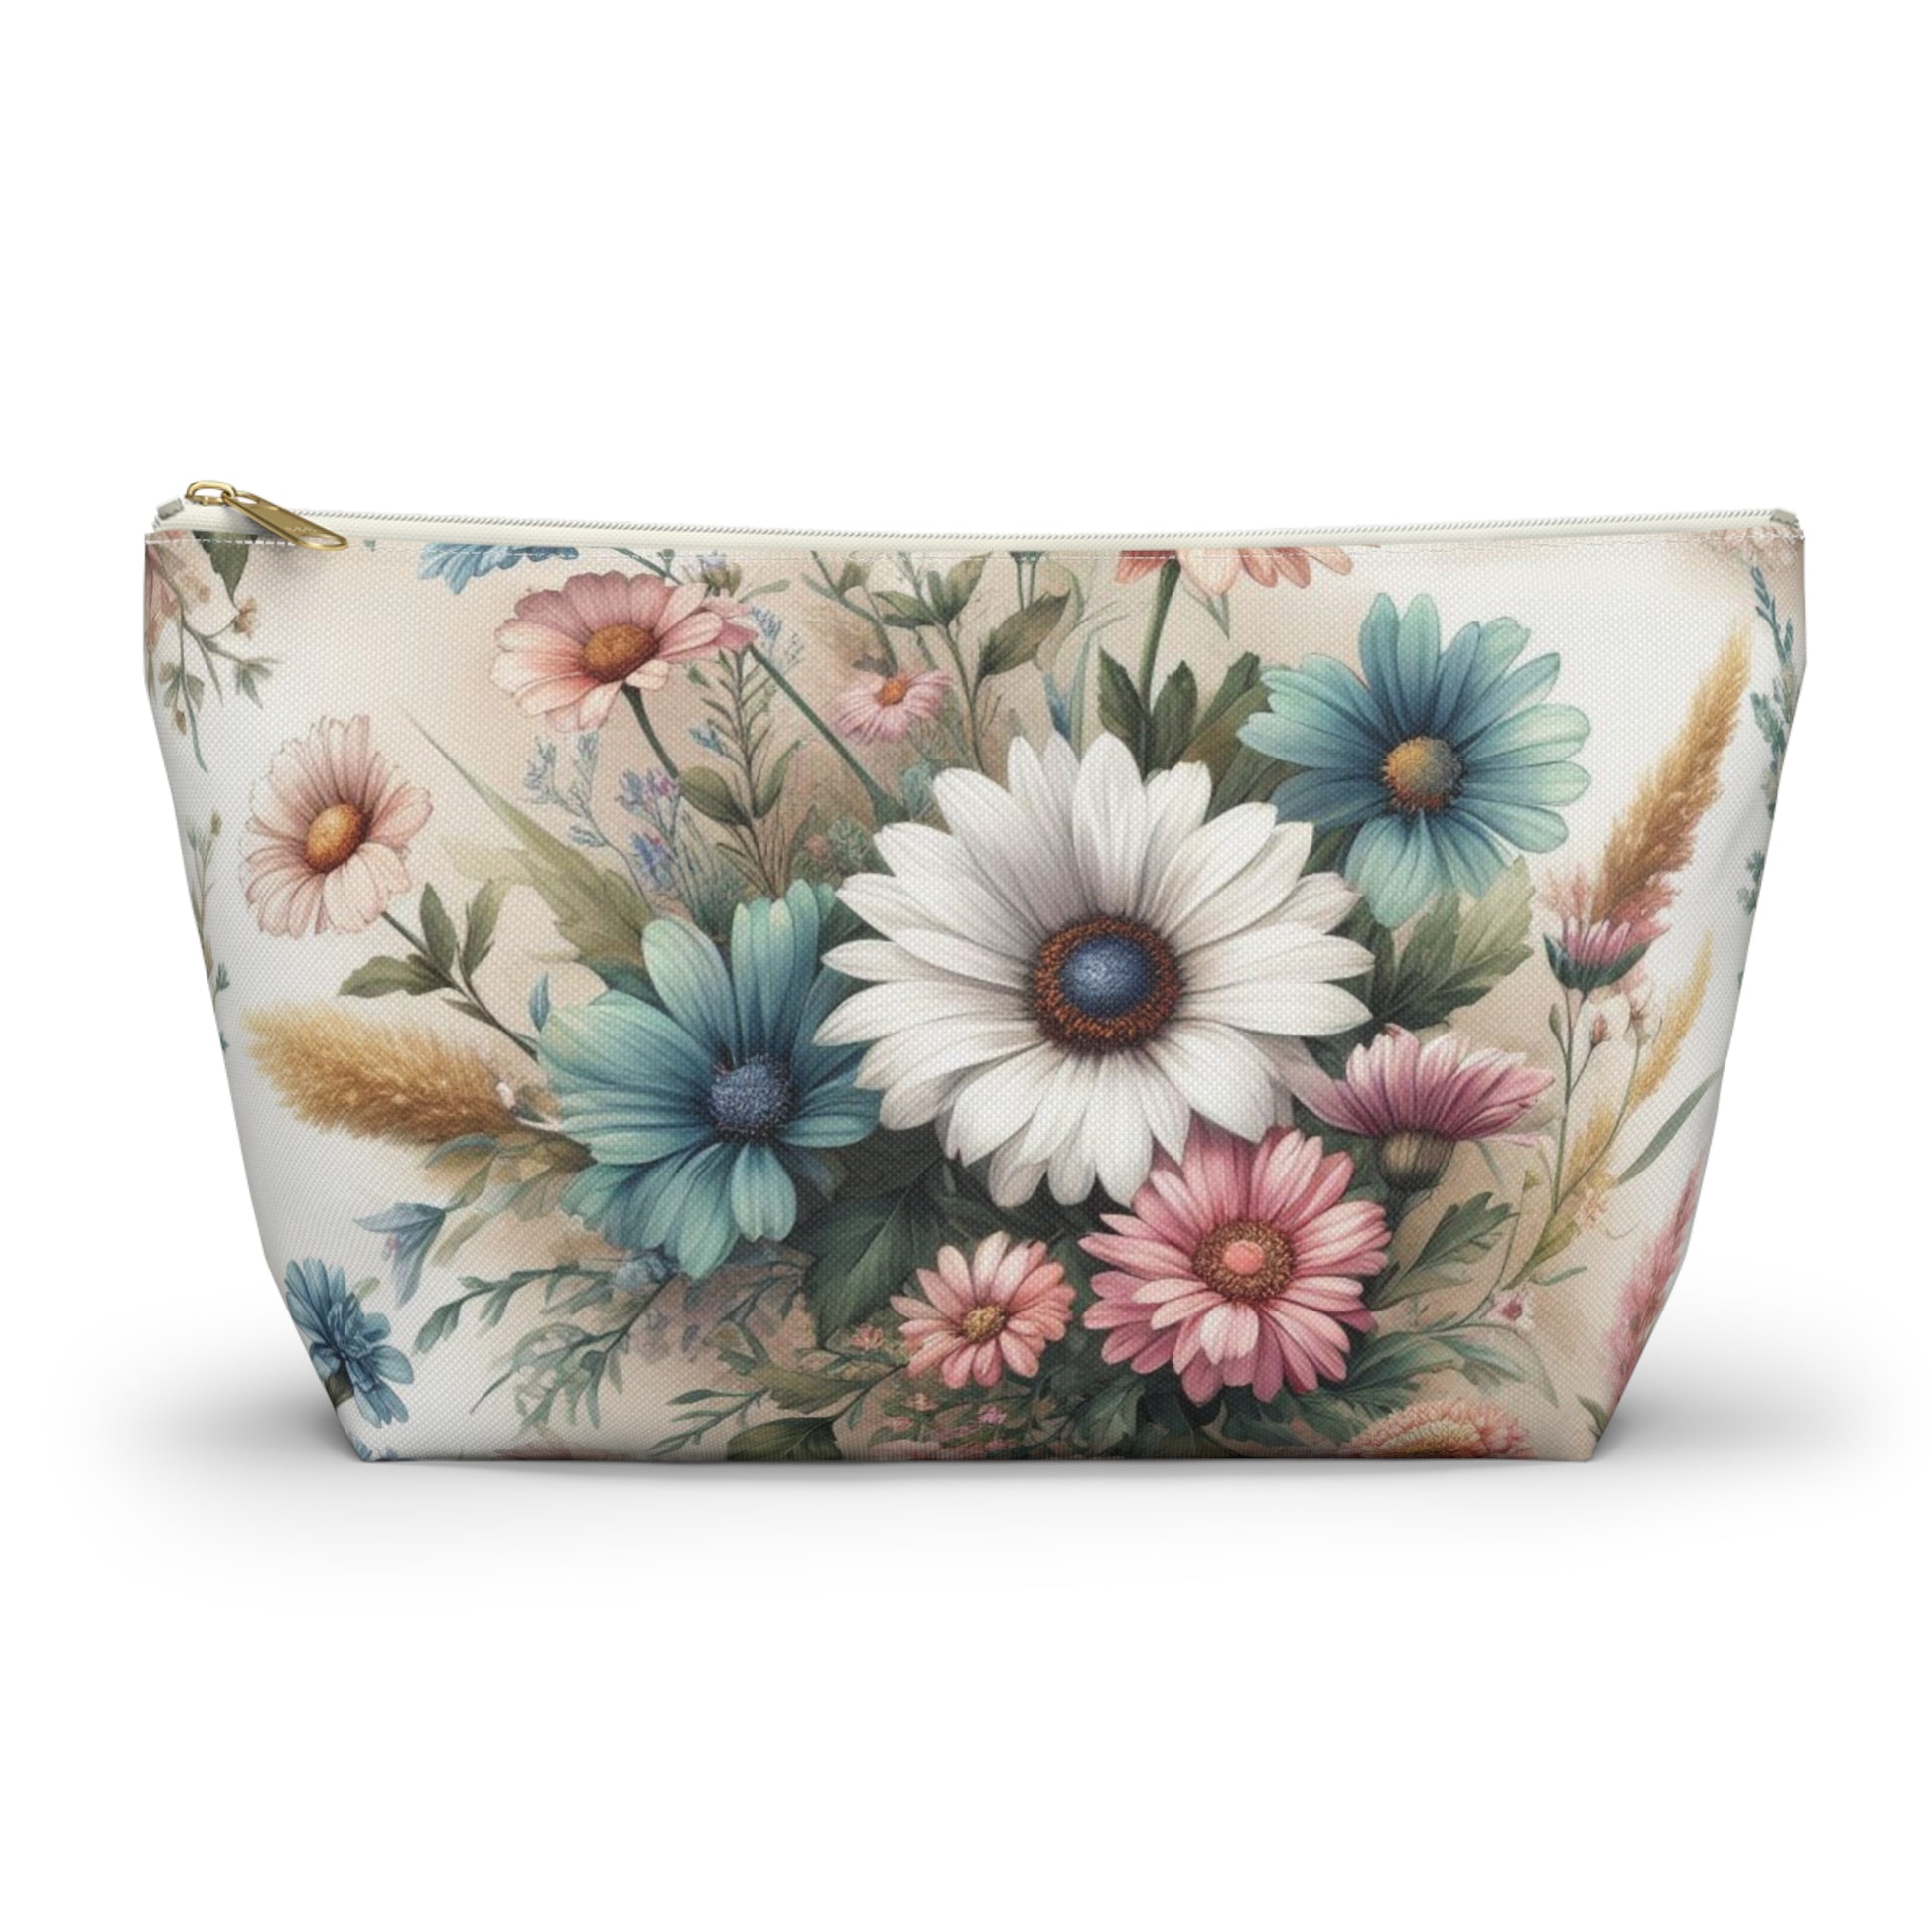 blue, pink and white daisy floral makeup bag perfect for a girl's birthday gift